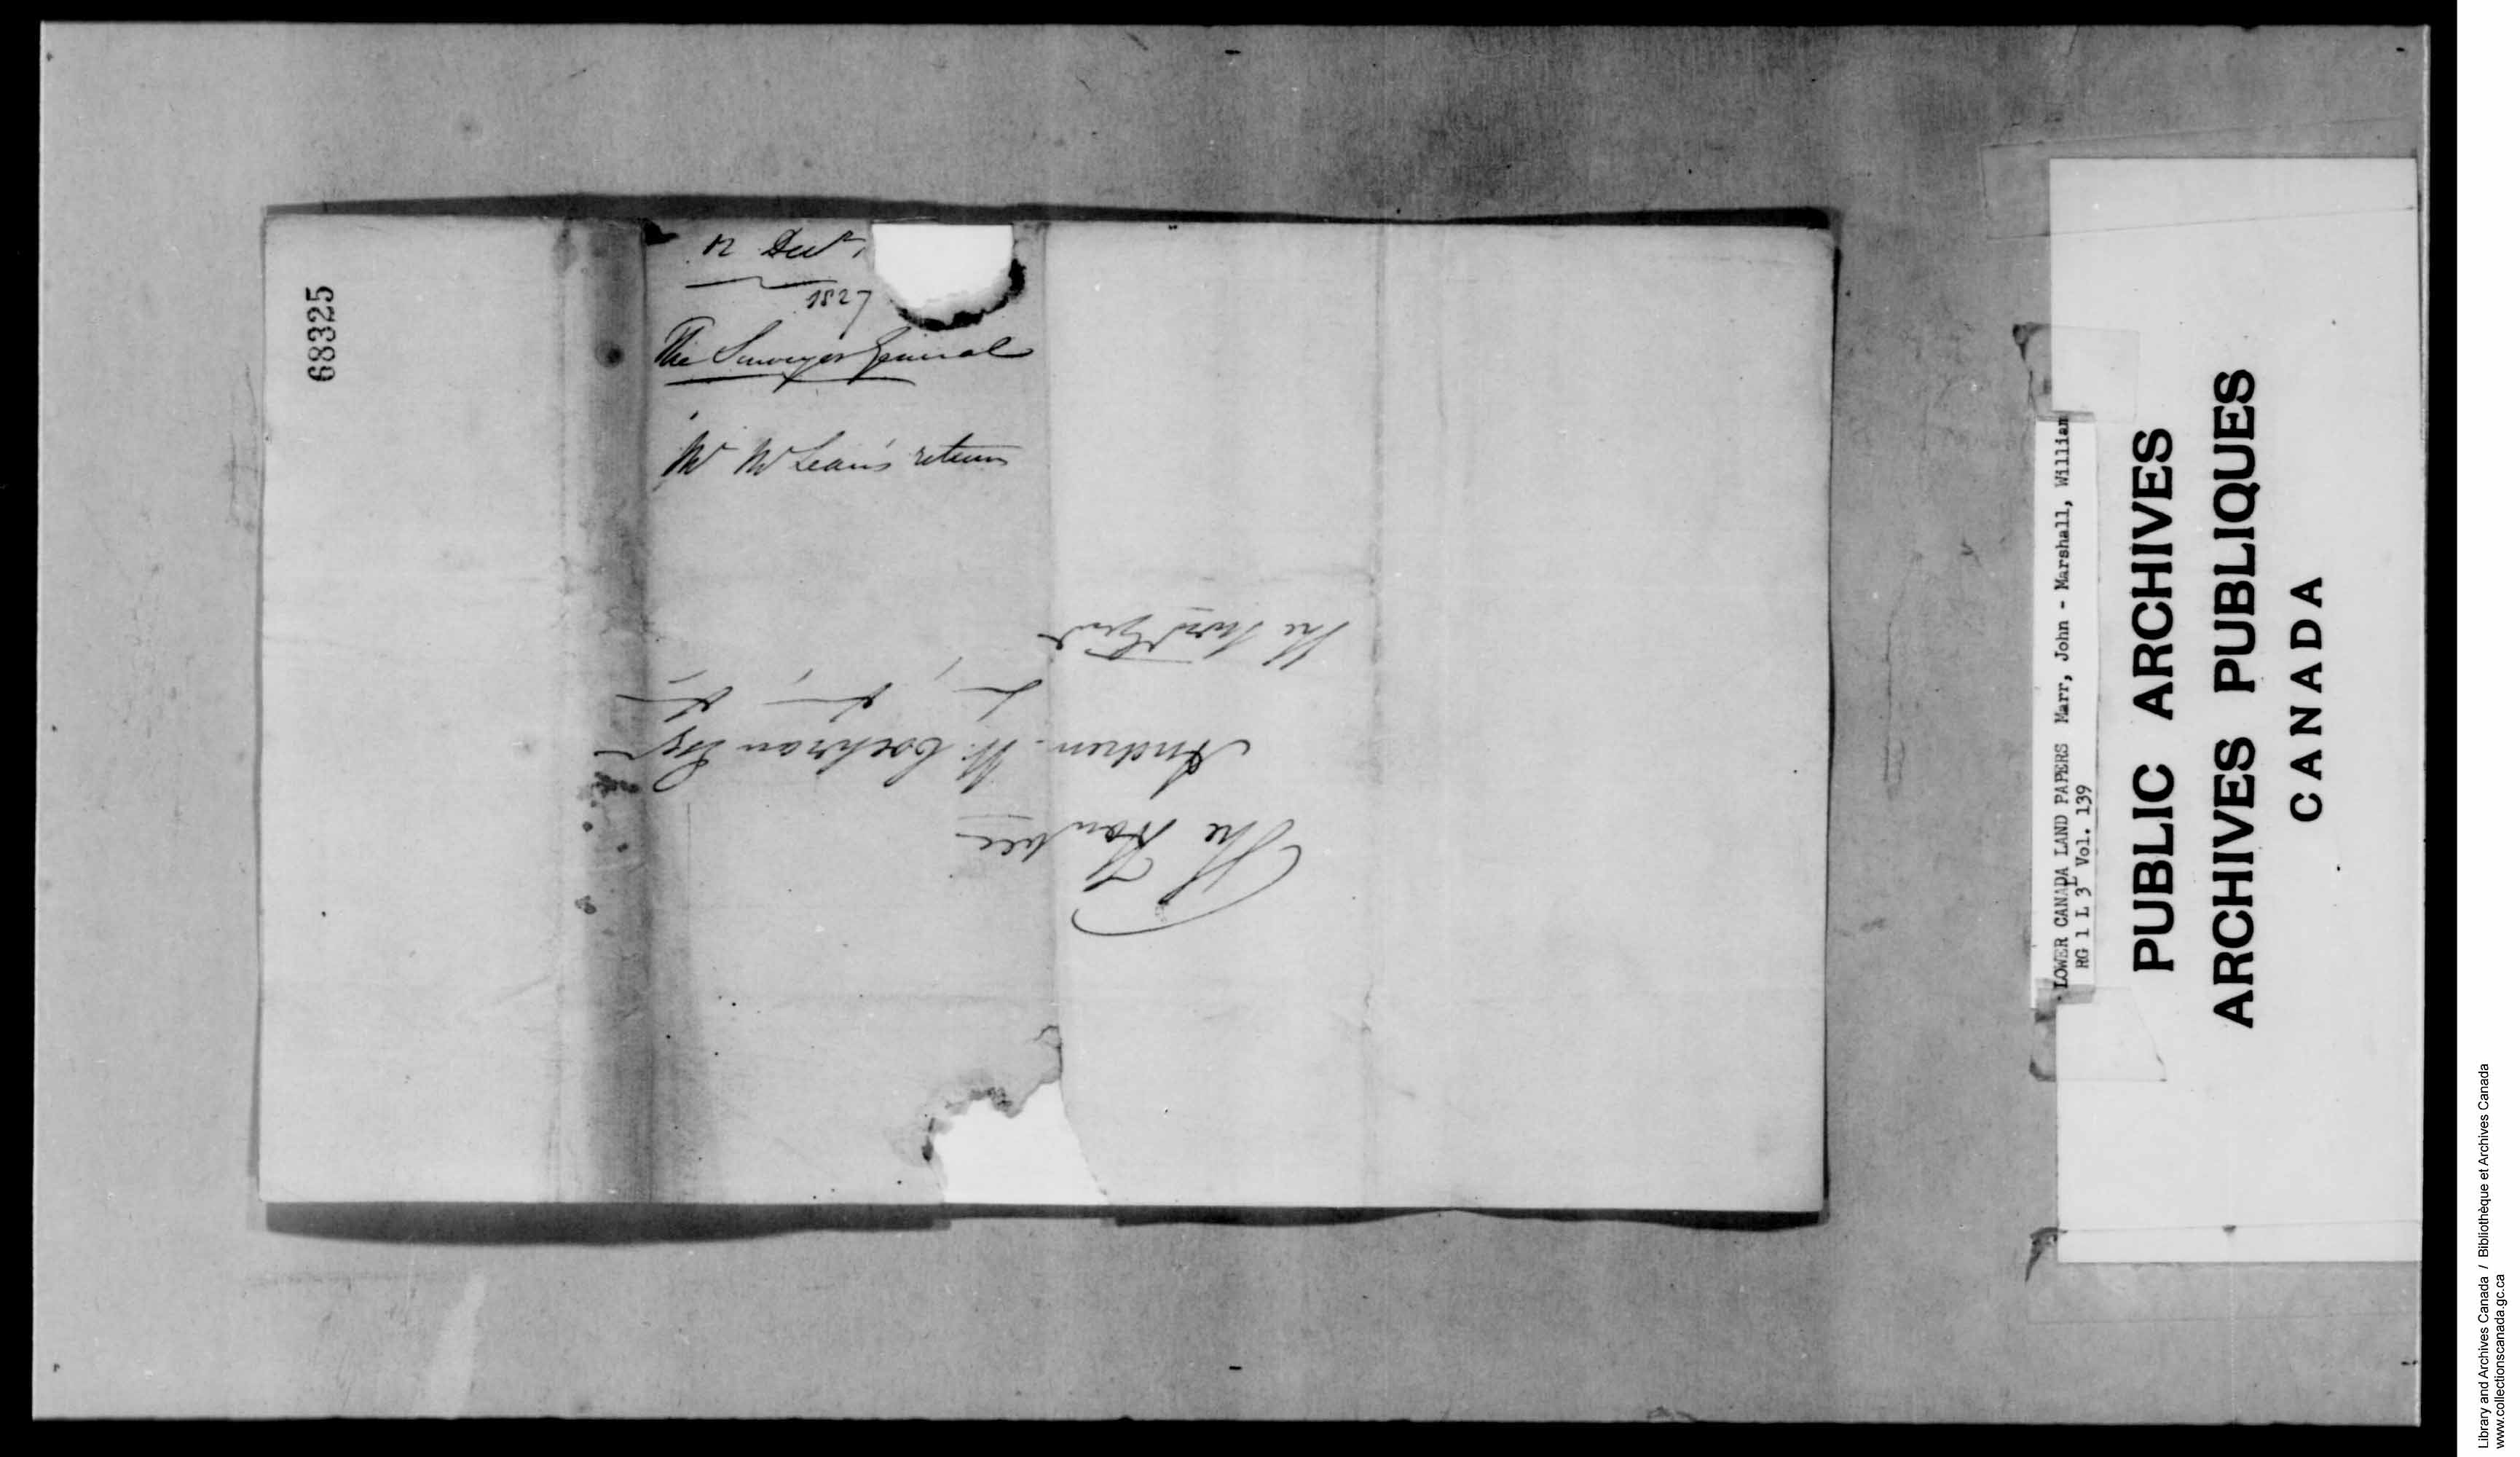 Digitized page of  for Image No.: e008713581